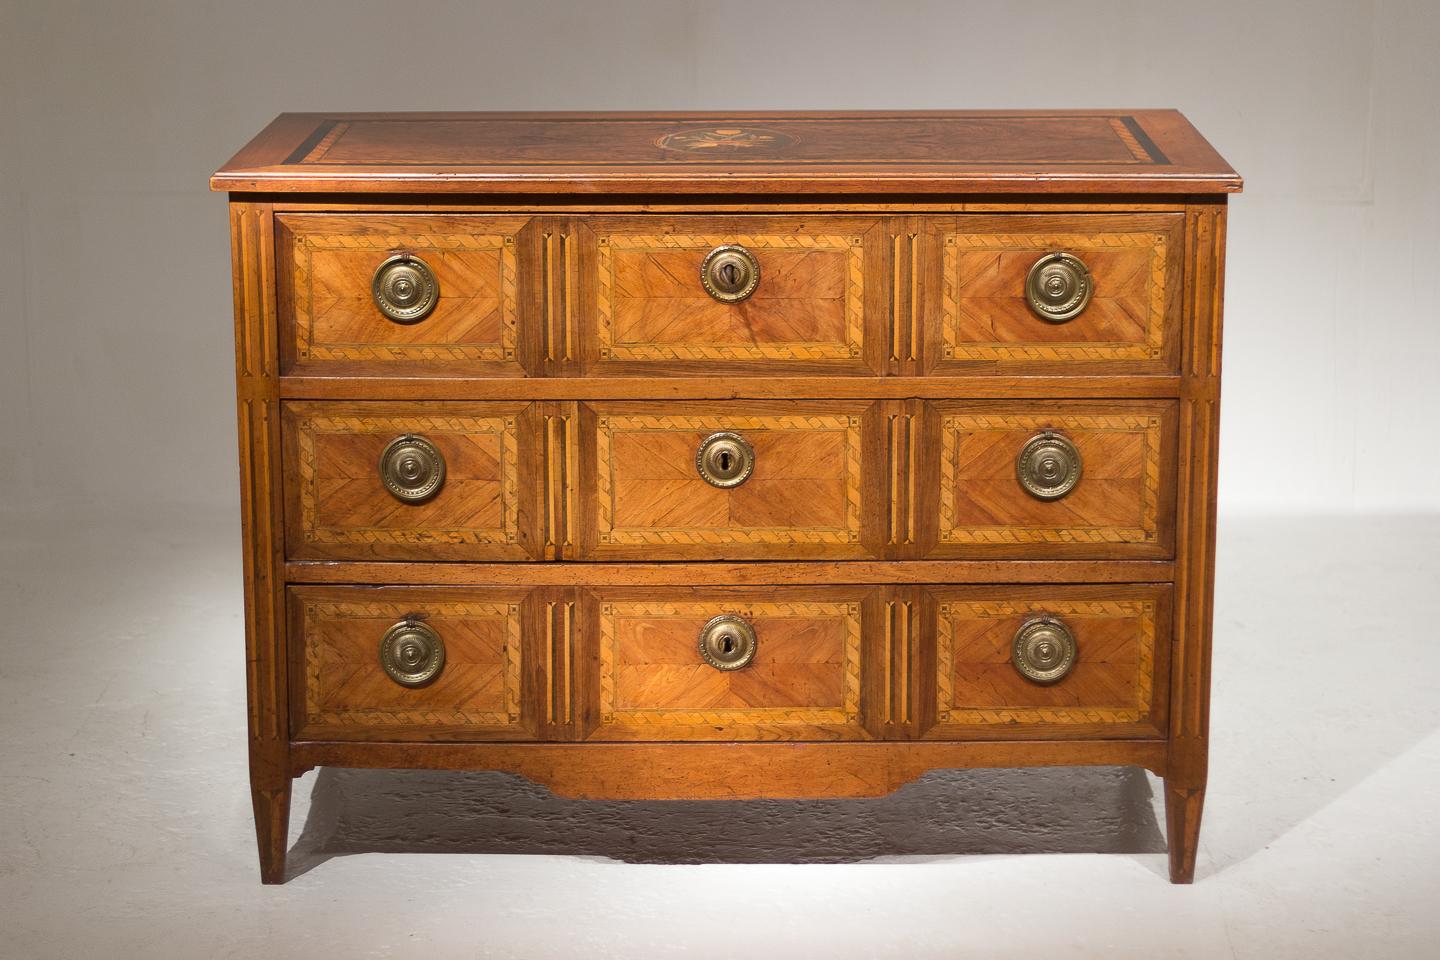 Late 18th century Italian three-drawer inlaid secretaire chest with wonderful patina and color.